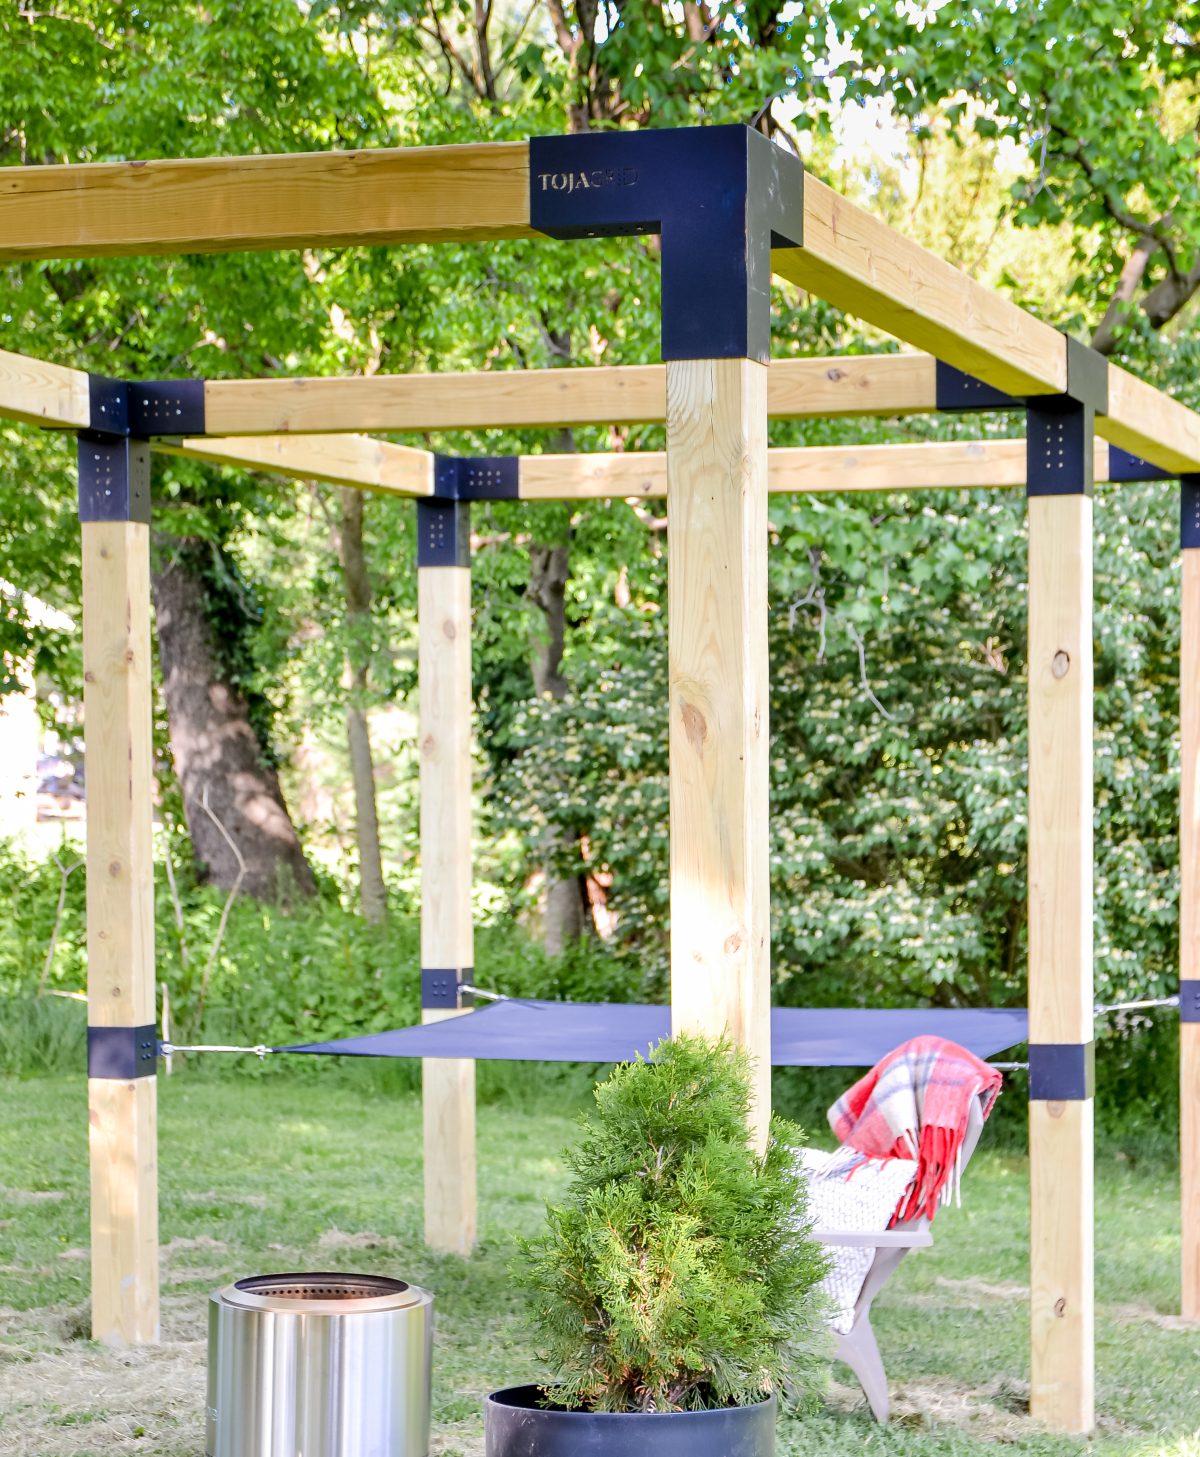 Toja Grid Pergolas: The Number 1 Outdoor Space Transformation Must-Have